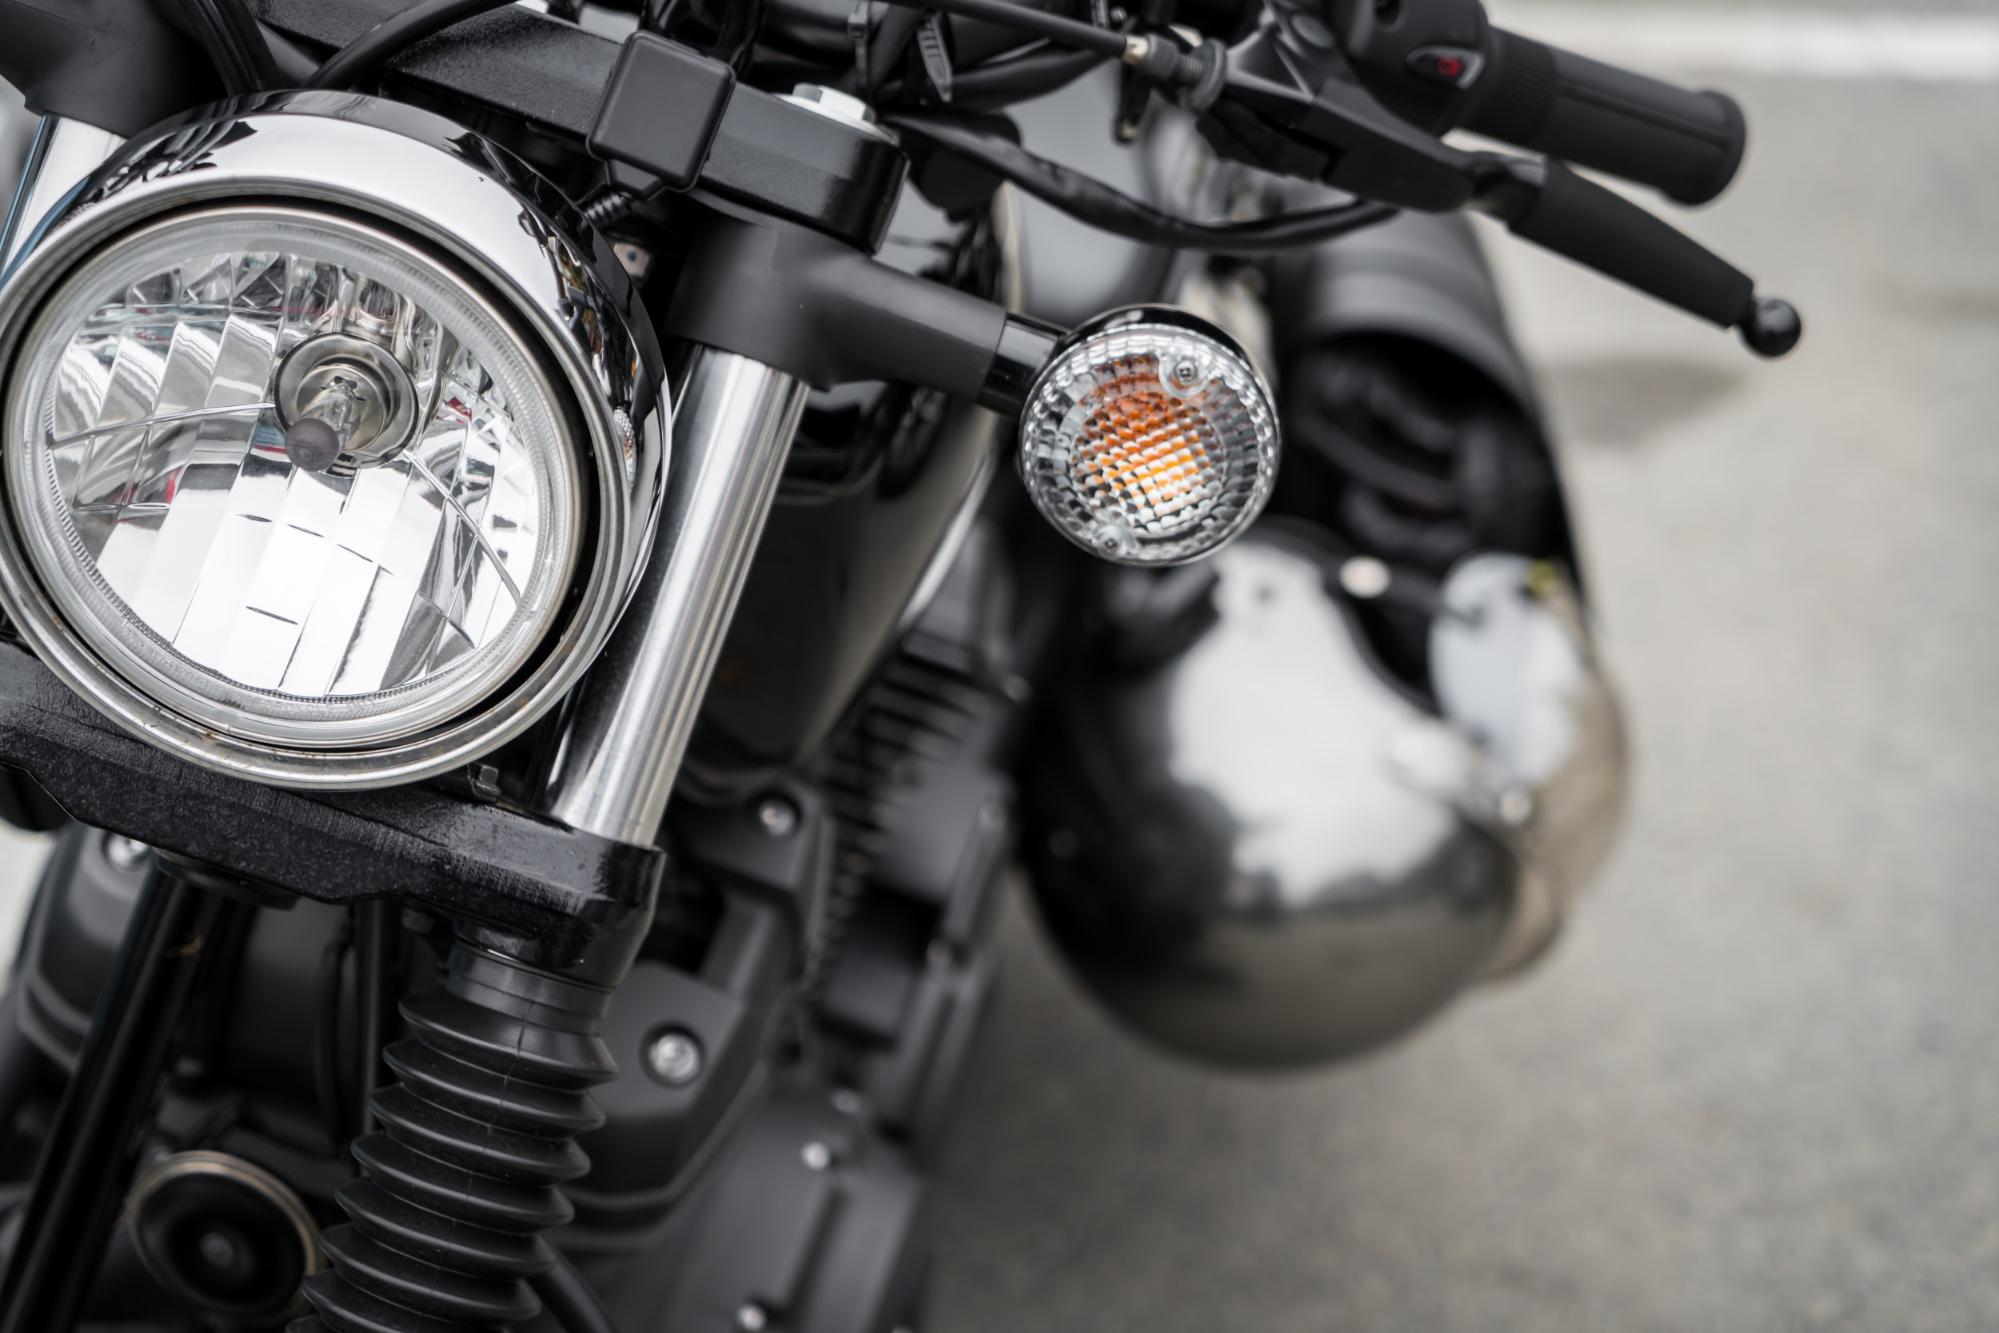 front end and headlight of motorcycle